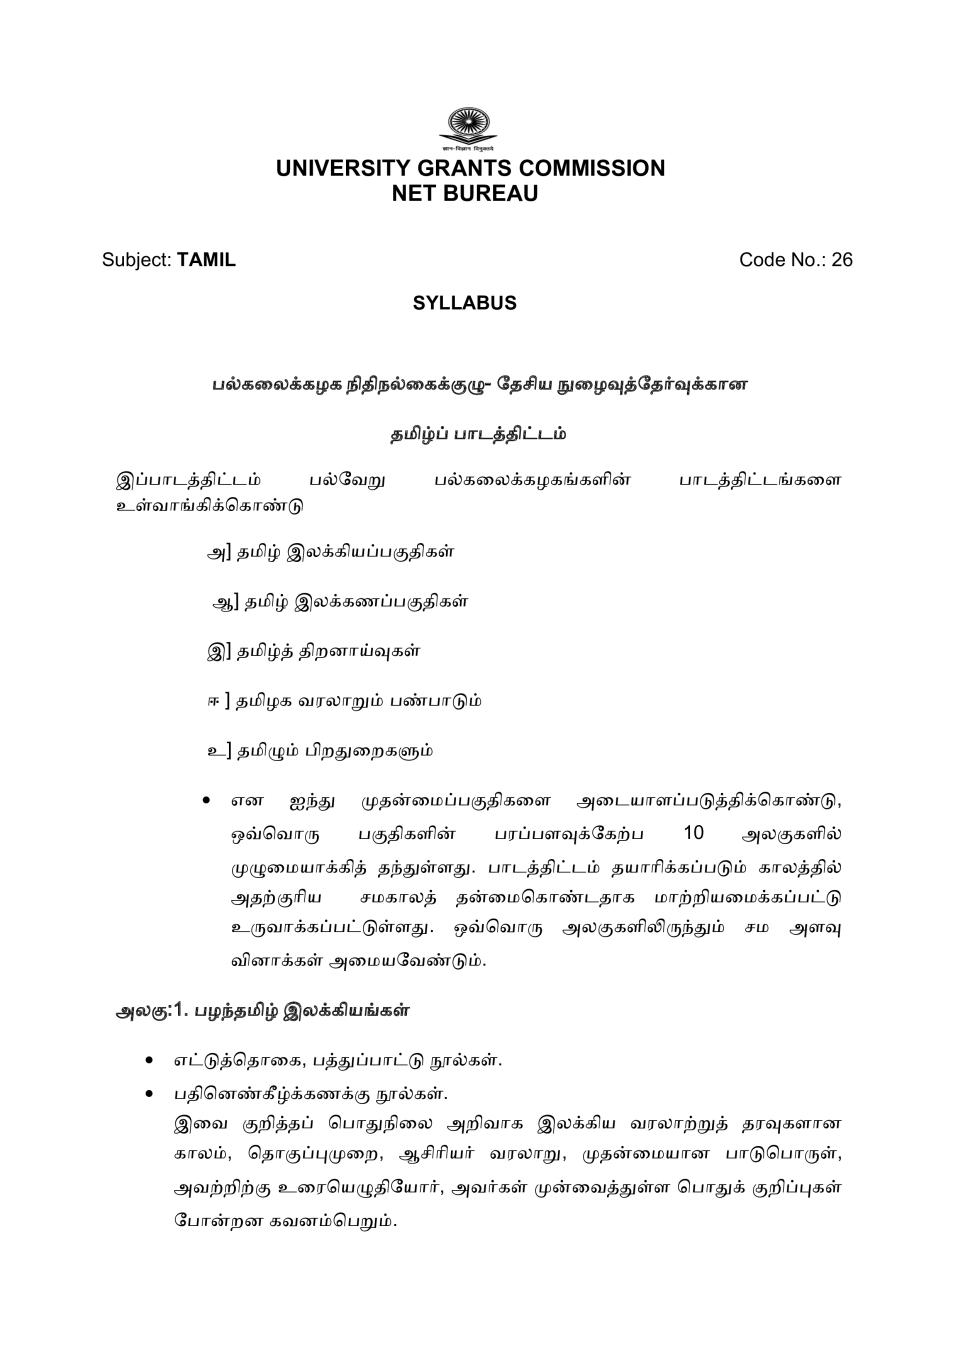 UGC NET Syllabus for Tamil 2020 - Page 1